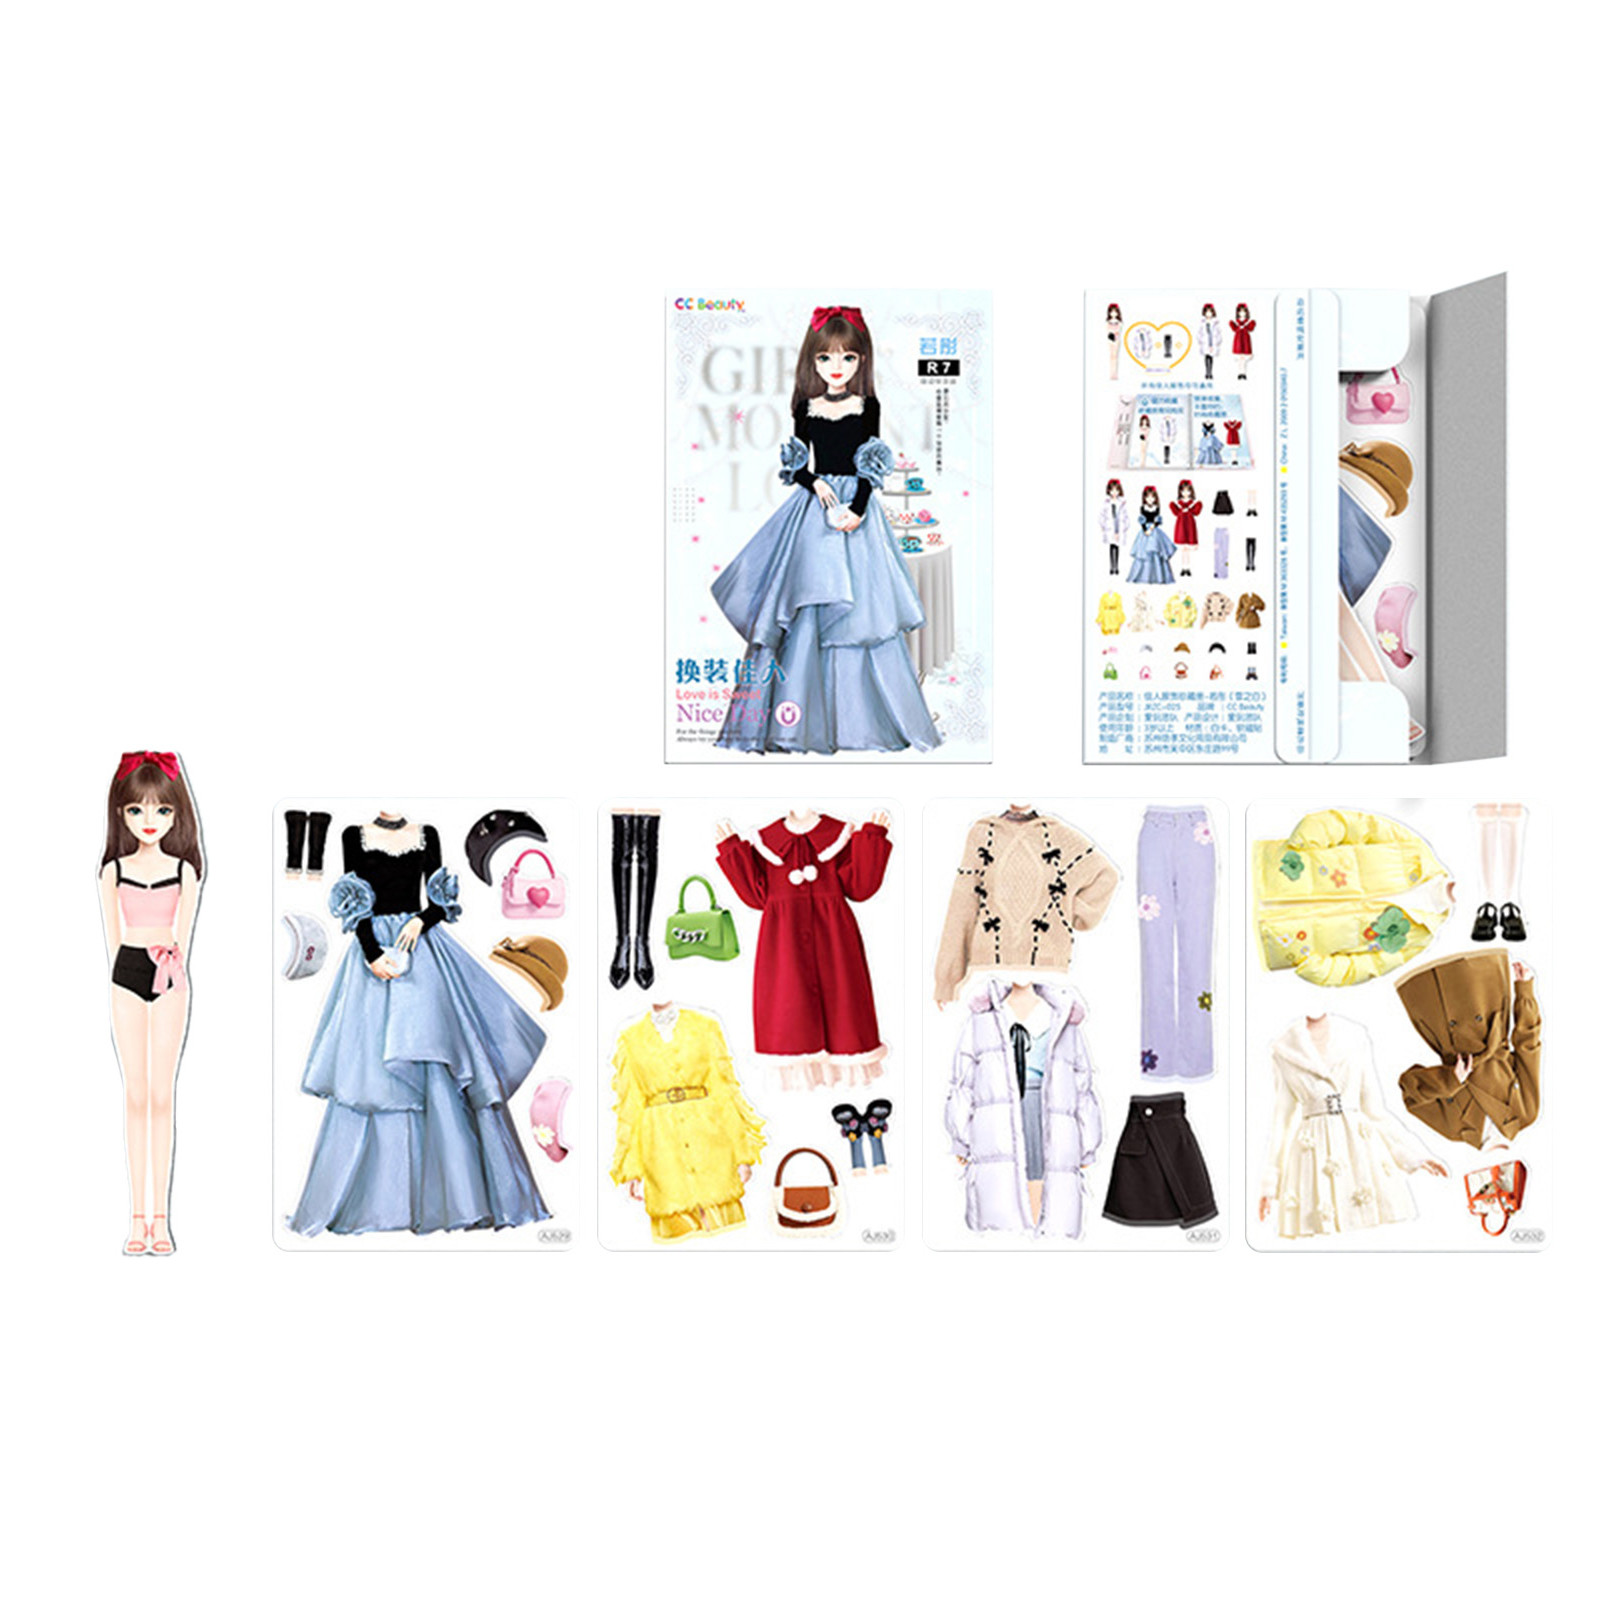 Loyerfyivos Magnetic Princess Dress Up Paper Doll Pretend Play Game, Travel Toys Car Road Trip,Magnet Clothes Puzzles for Kids Toddler Girls,Preschool Learning Created Imagine Set Birthday Gift - image 3 of 5